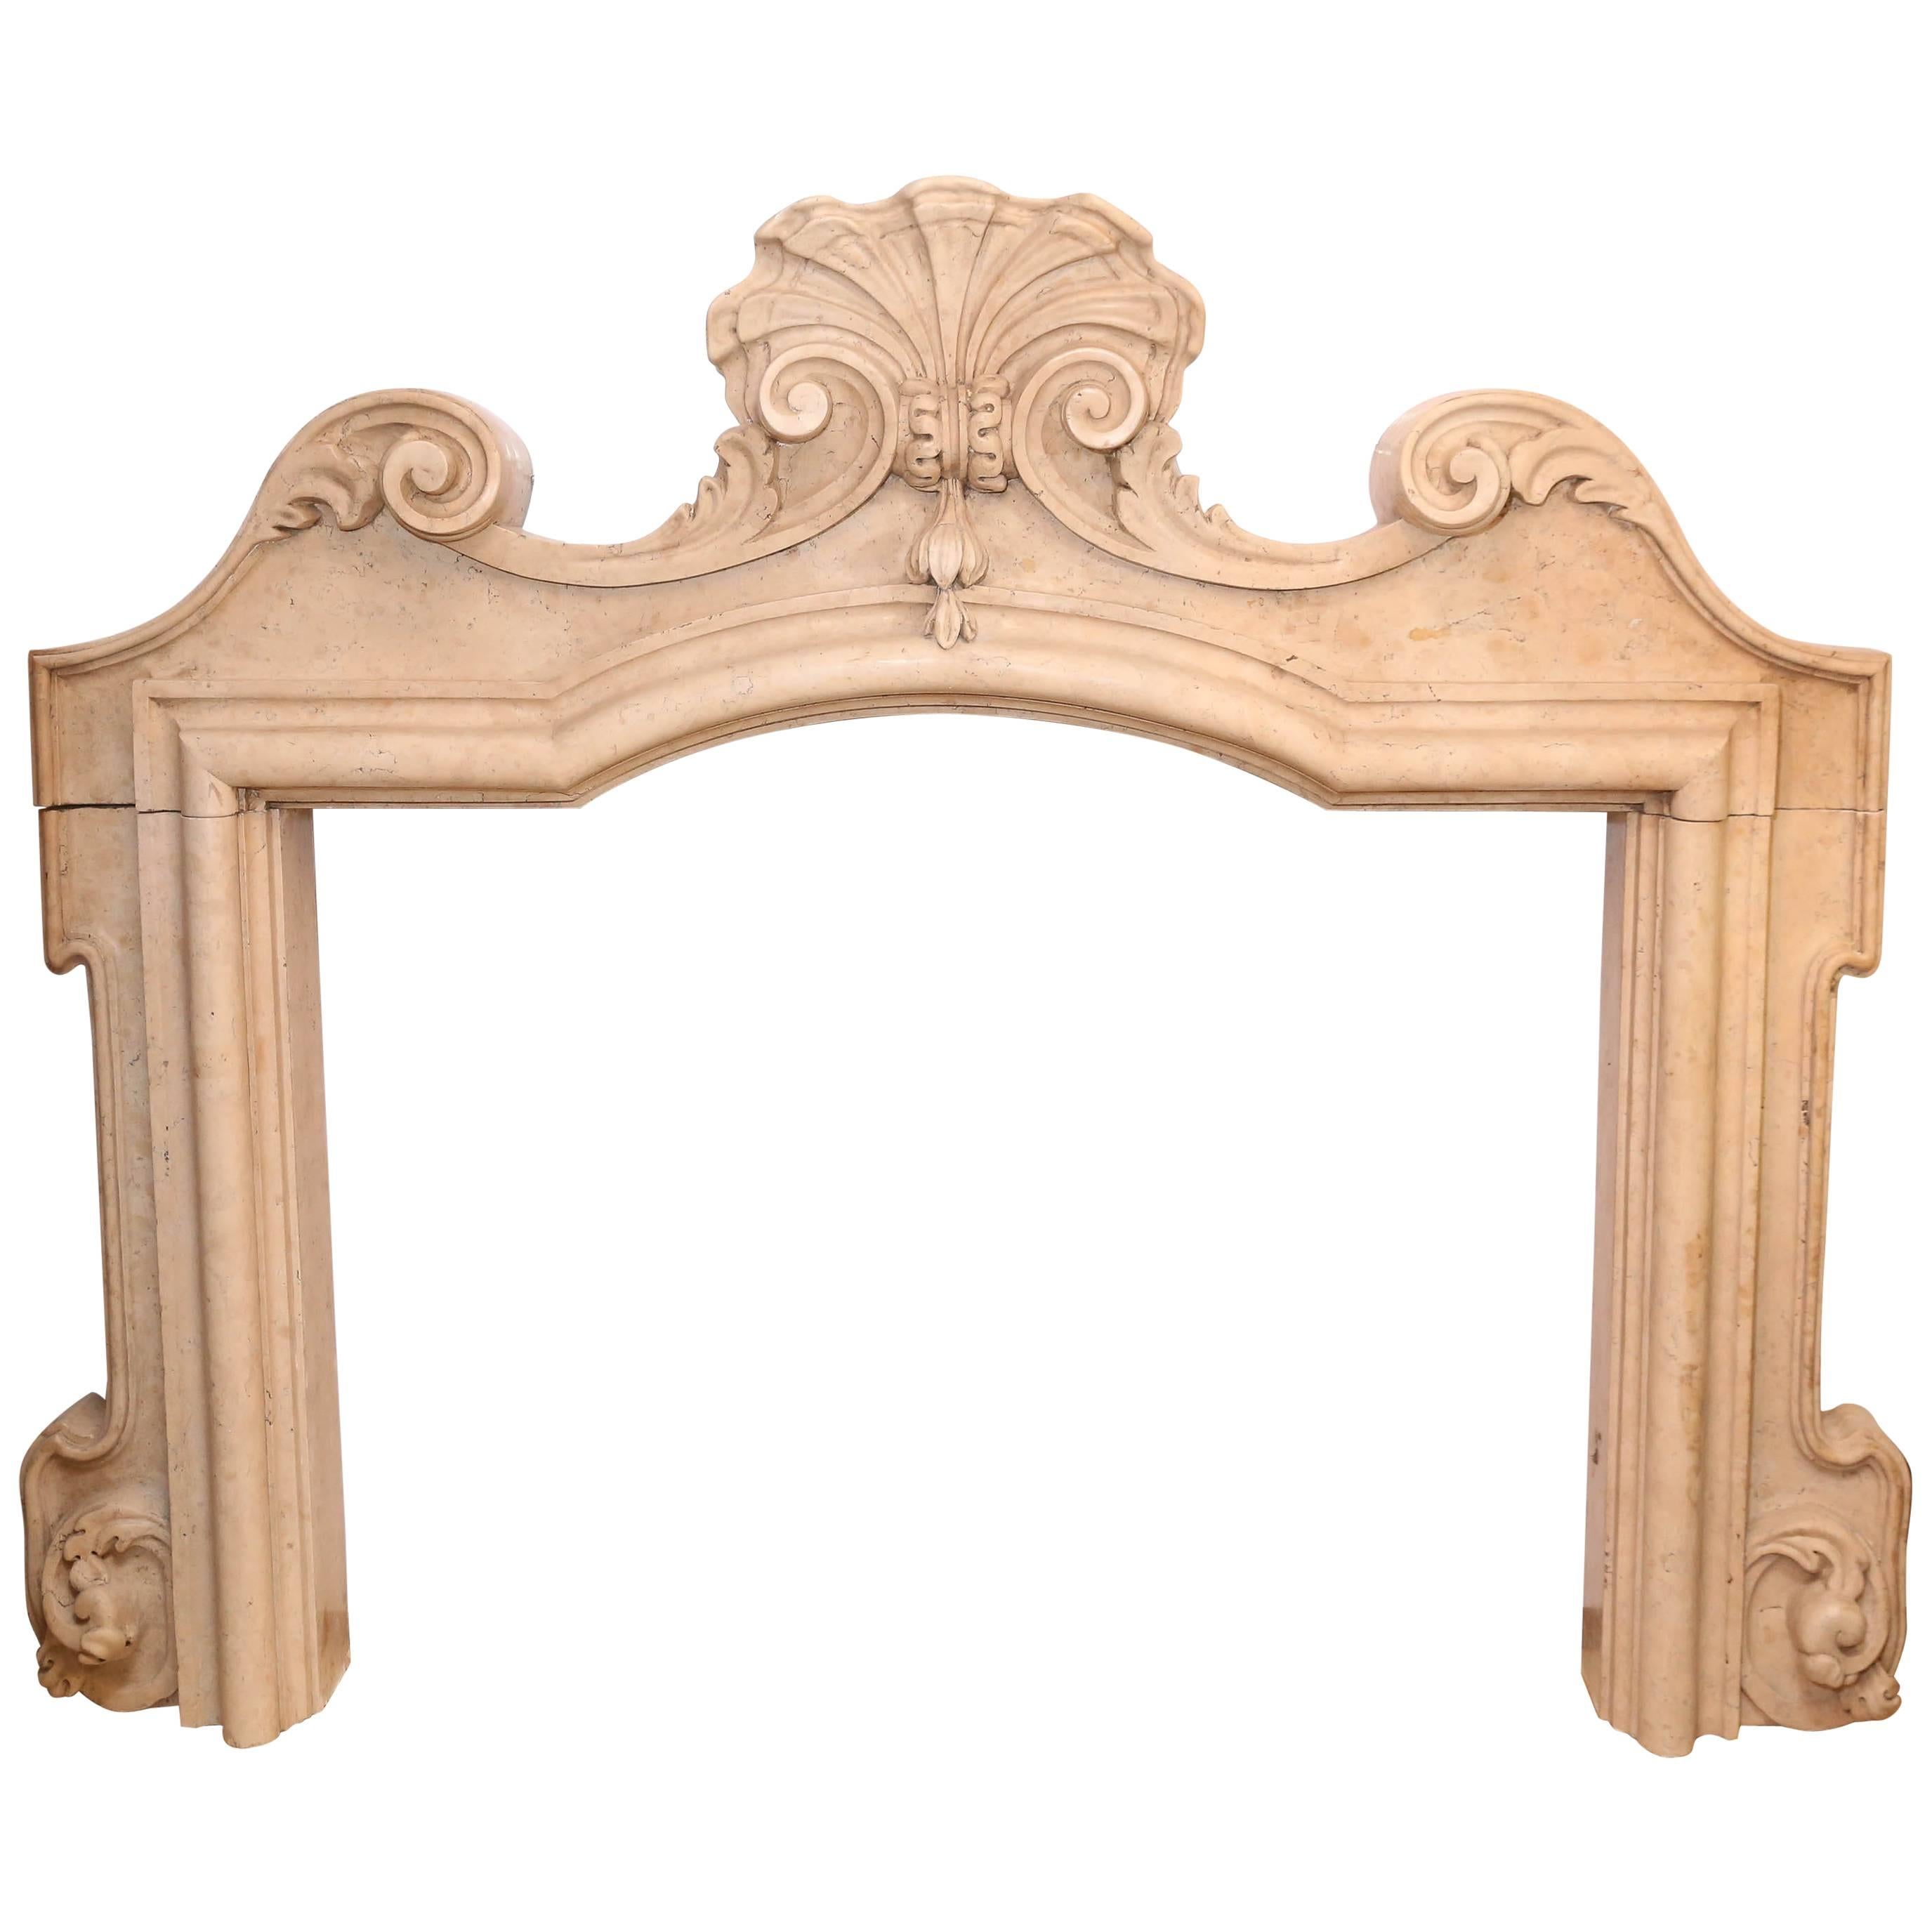 Antique Italian Marble Fireplace with Cartouche